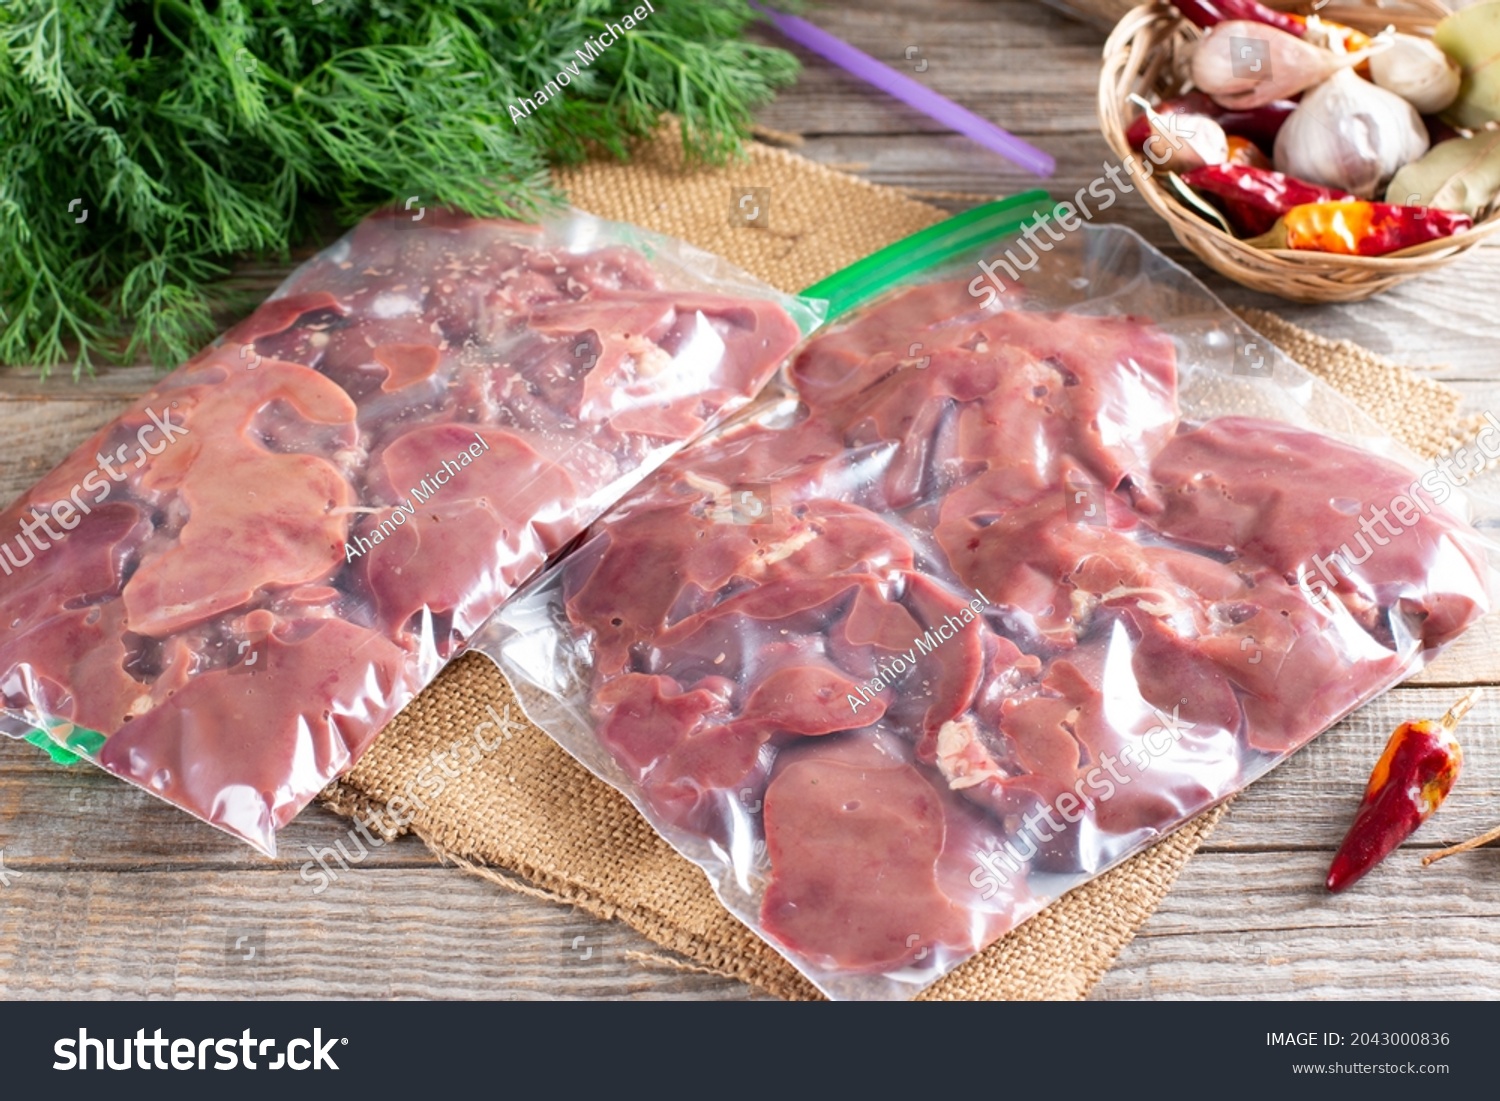 Frozen offal, liver, heart, stomachs in a plastic bag on a wooden table. Frozen products. Frozen food #2043000836